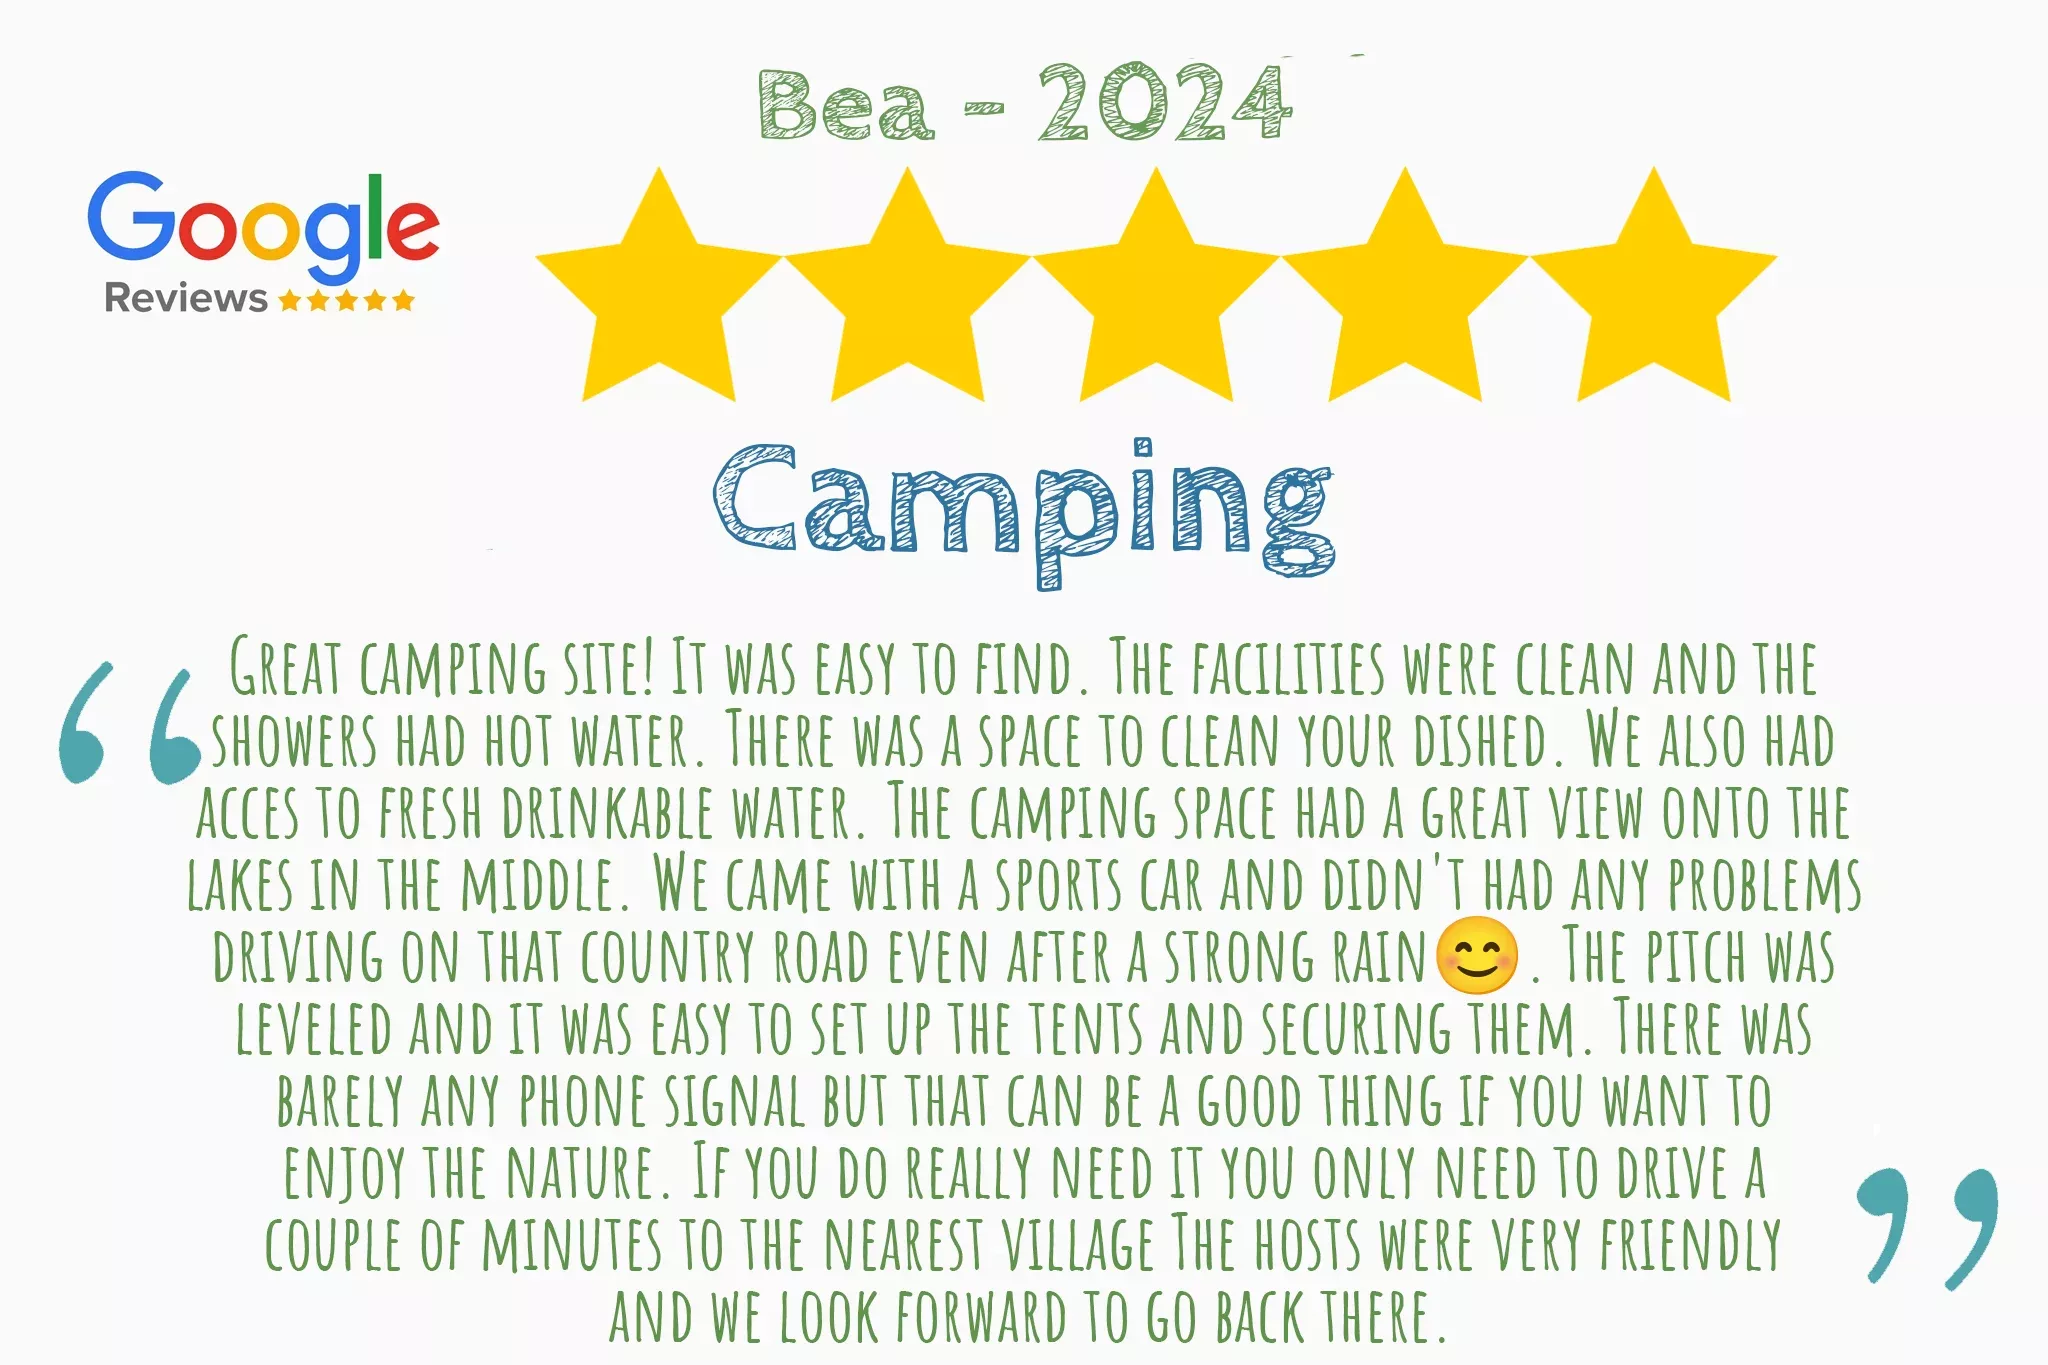 5 star pitchup review from Bea that says "Great camping site! It was easy to find. The facilities were clean and the  showers had hot water. There was a space to clean your dished. We also had  acces to fresh drinkable water. The camping space had a great view onto the  lakes in the middle. We came with a sports car and didn't had any problems  driving on that country road even after a strong rain😊. The pitch was  leveled and it was easy to set up the tents and securing them. There was  barely any phone signal but that can be a good thing if you want to  enjoy the nature. If you do really need it you only need to drive a  couple of minutes to the nearest village The hosts were very friendly  and we look forward to go back there."